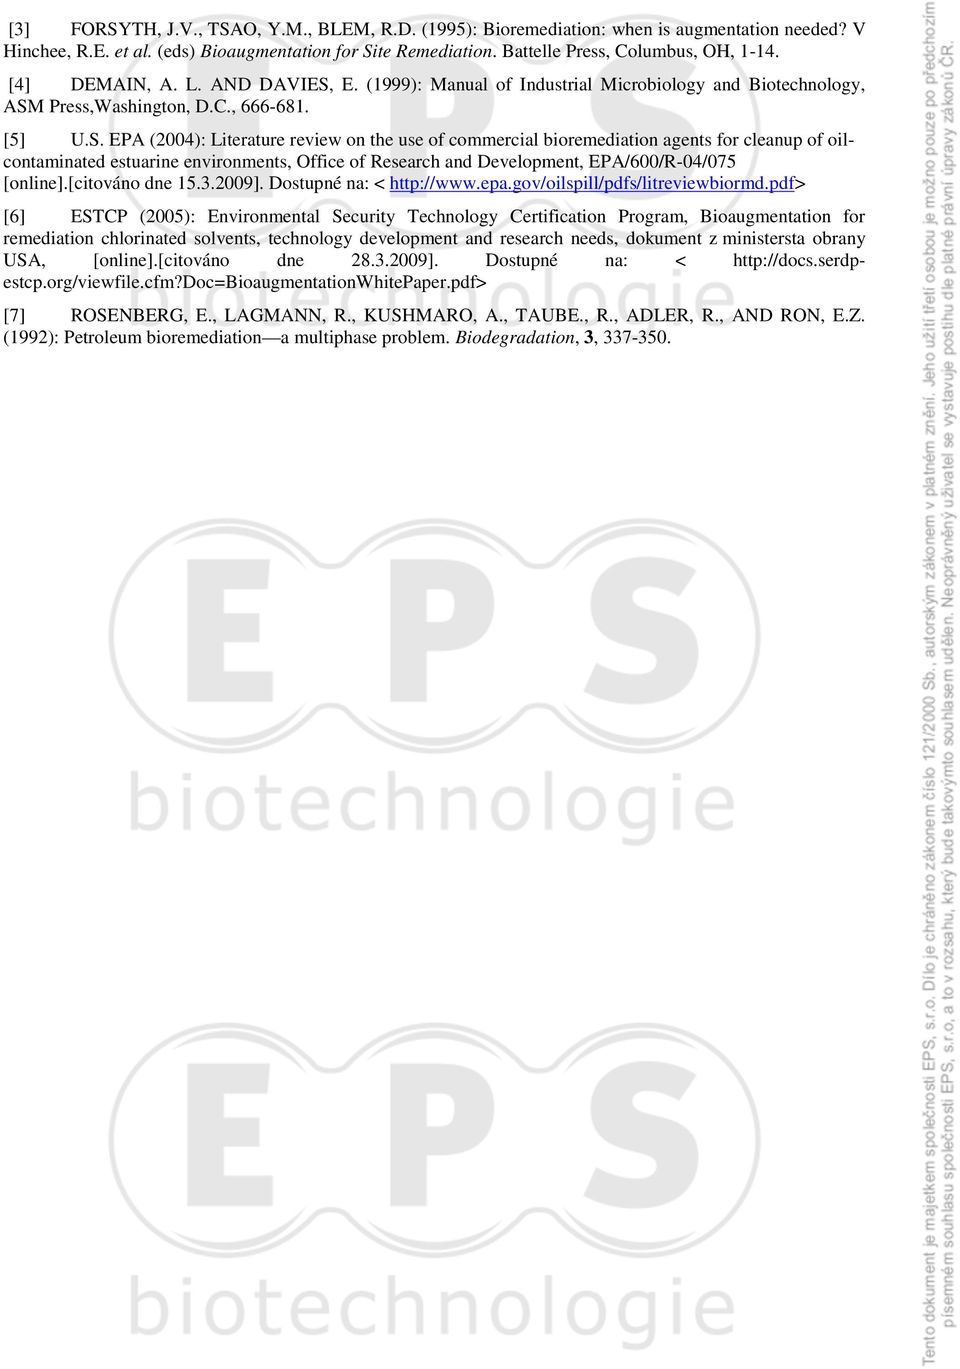 E. (1999): Manual of Industrial Microbiology and Biotechnology, ASM